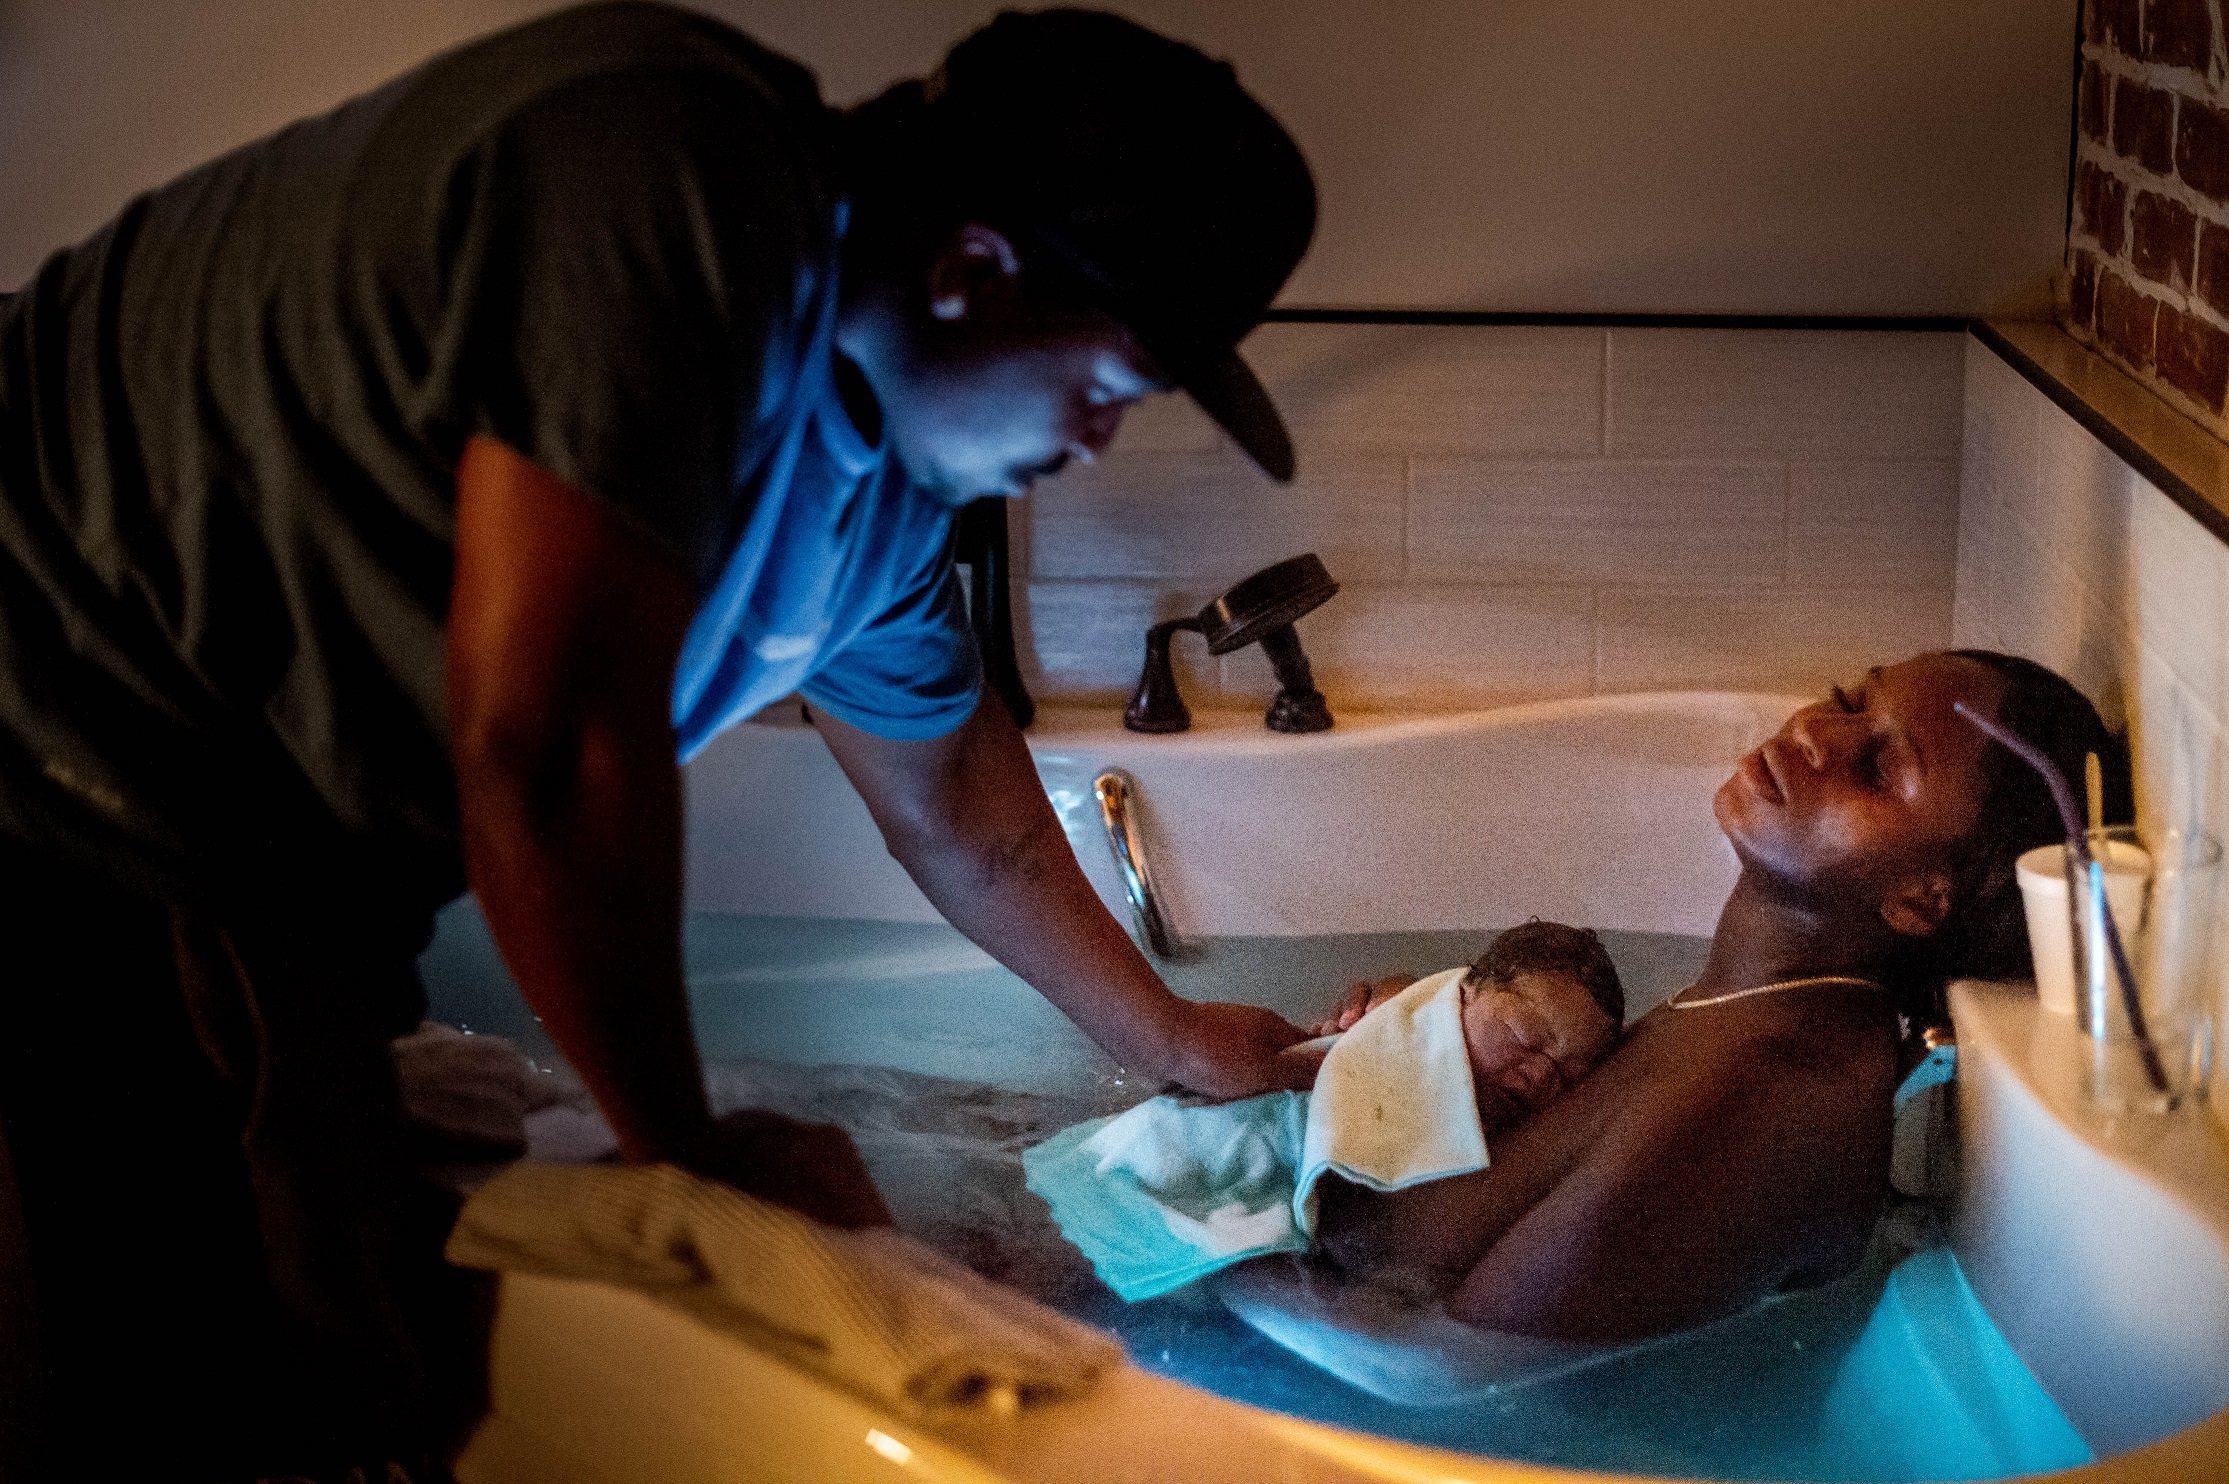 Honorable Mention Amid High Mortality Rates, Black Women Turn to Midwives Sarah Reingewirtz, United States, for Los Angeles Daily News and Southern California News Group